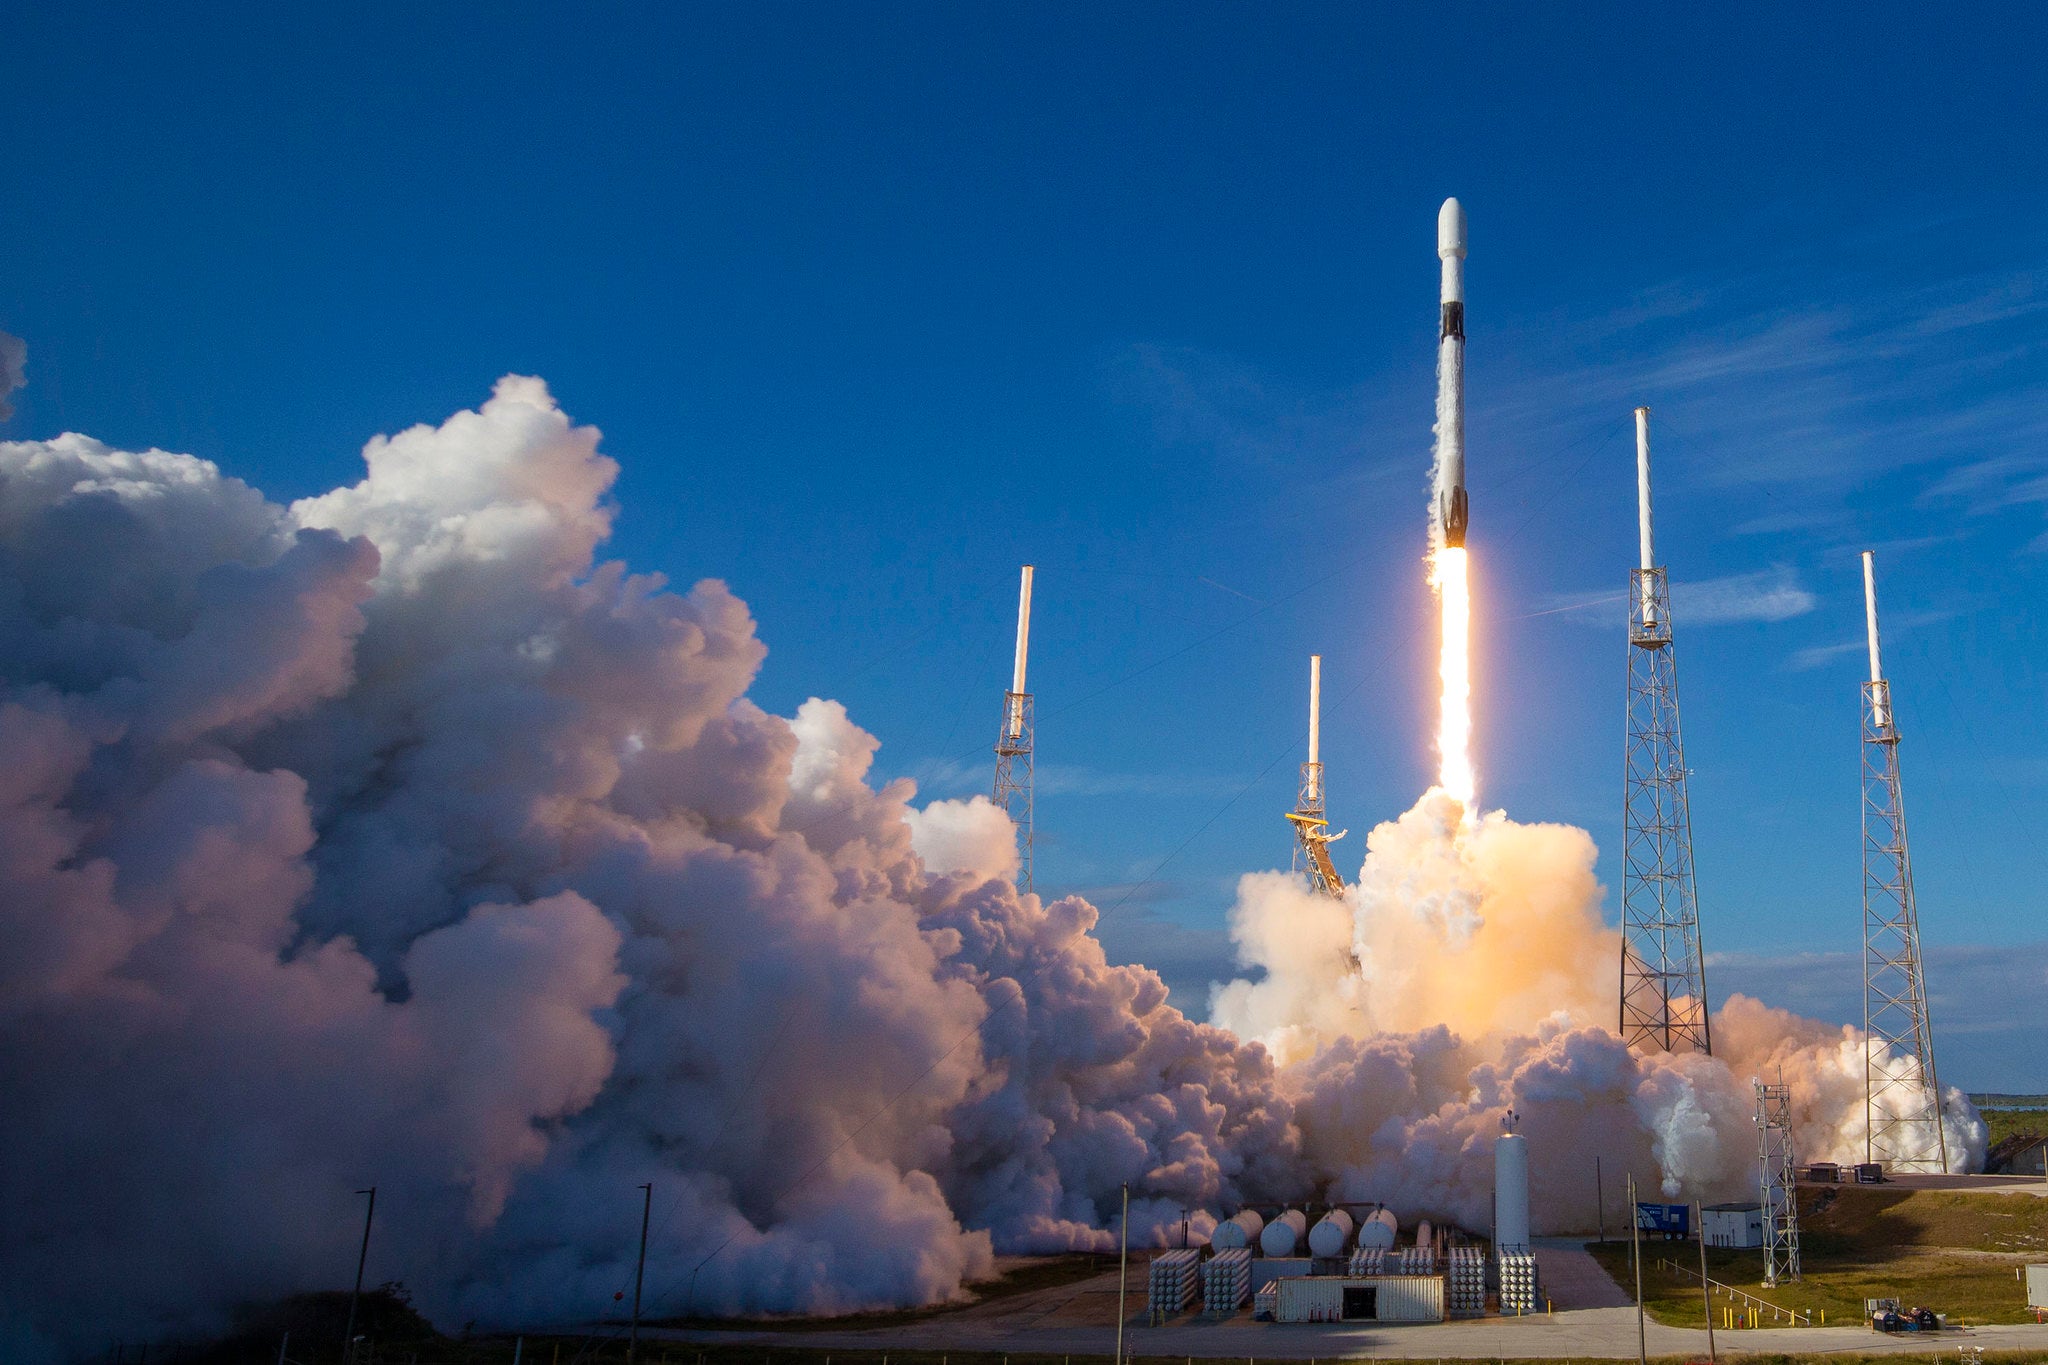 SpaceX raises $1.9 billion in its latest funding round